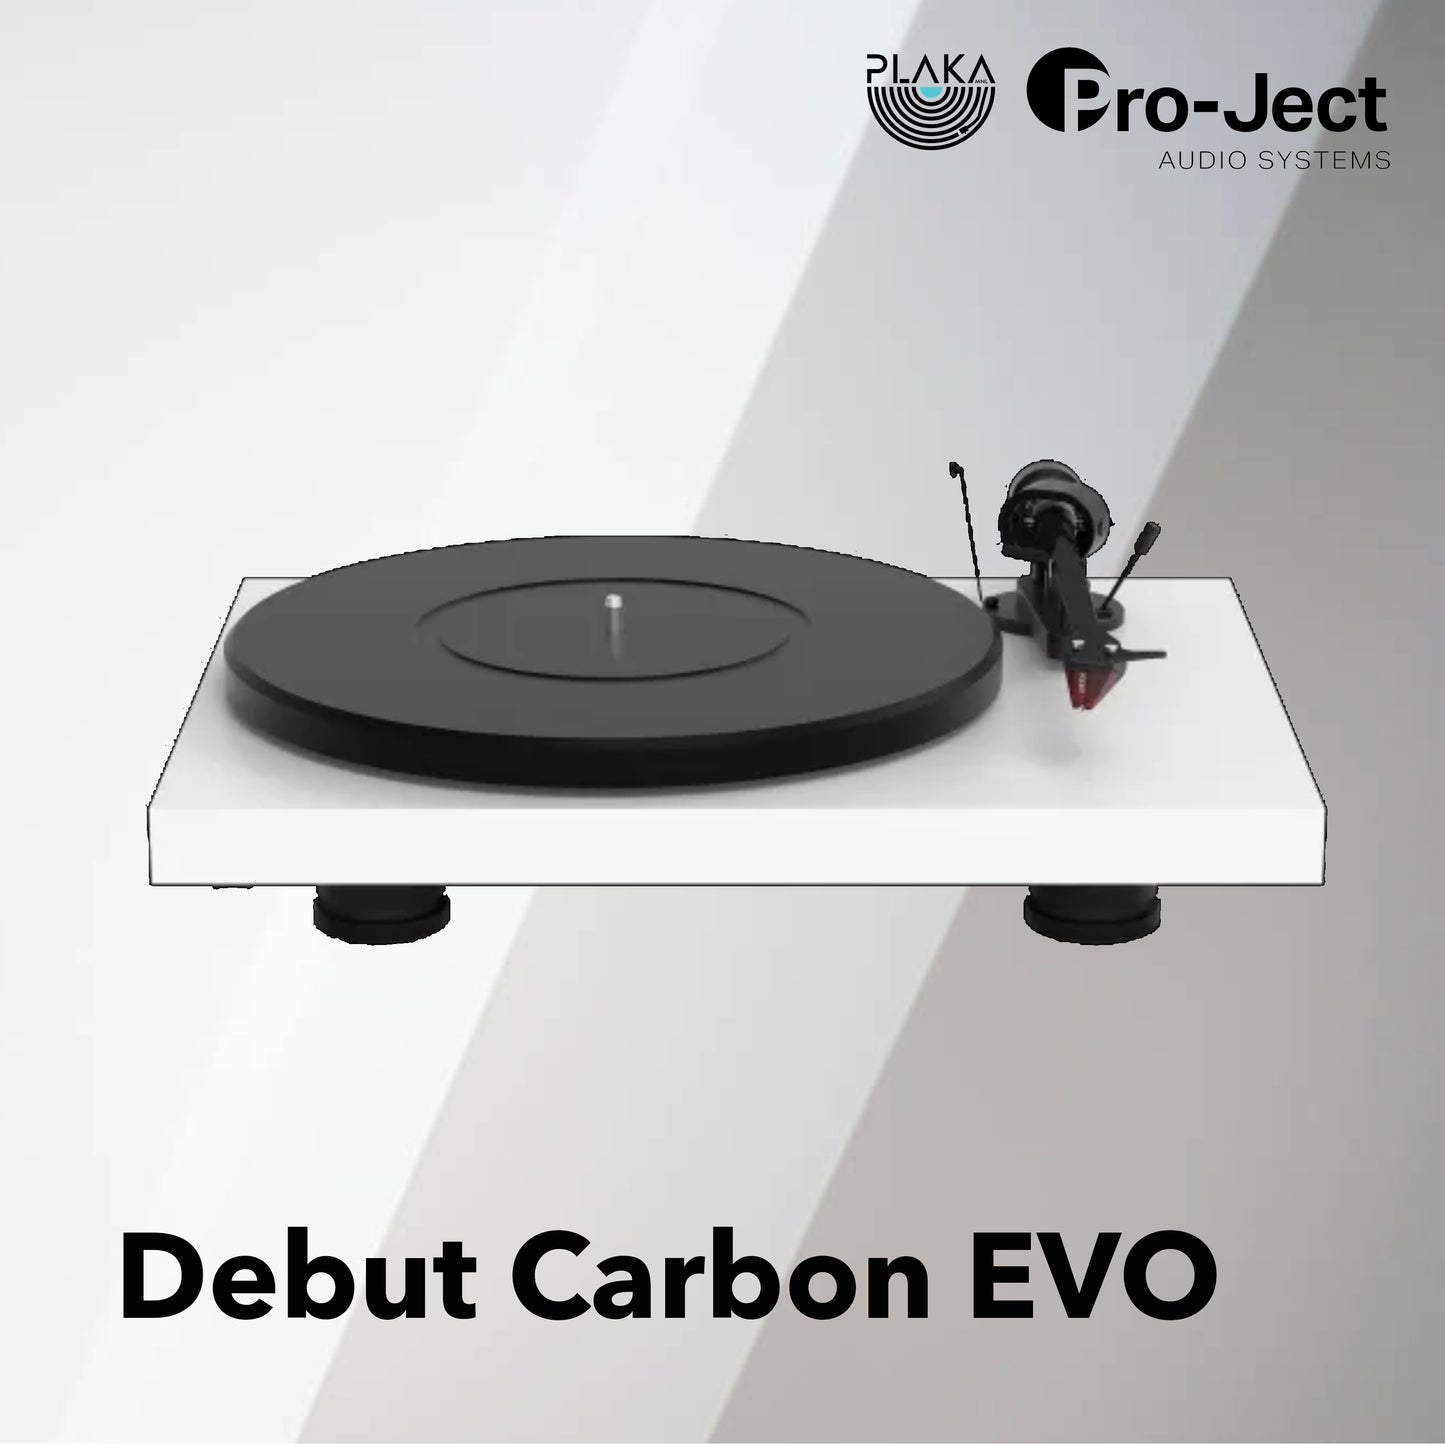 Pro-ject Debut Carbon EVO Turntable